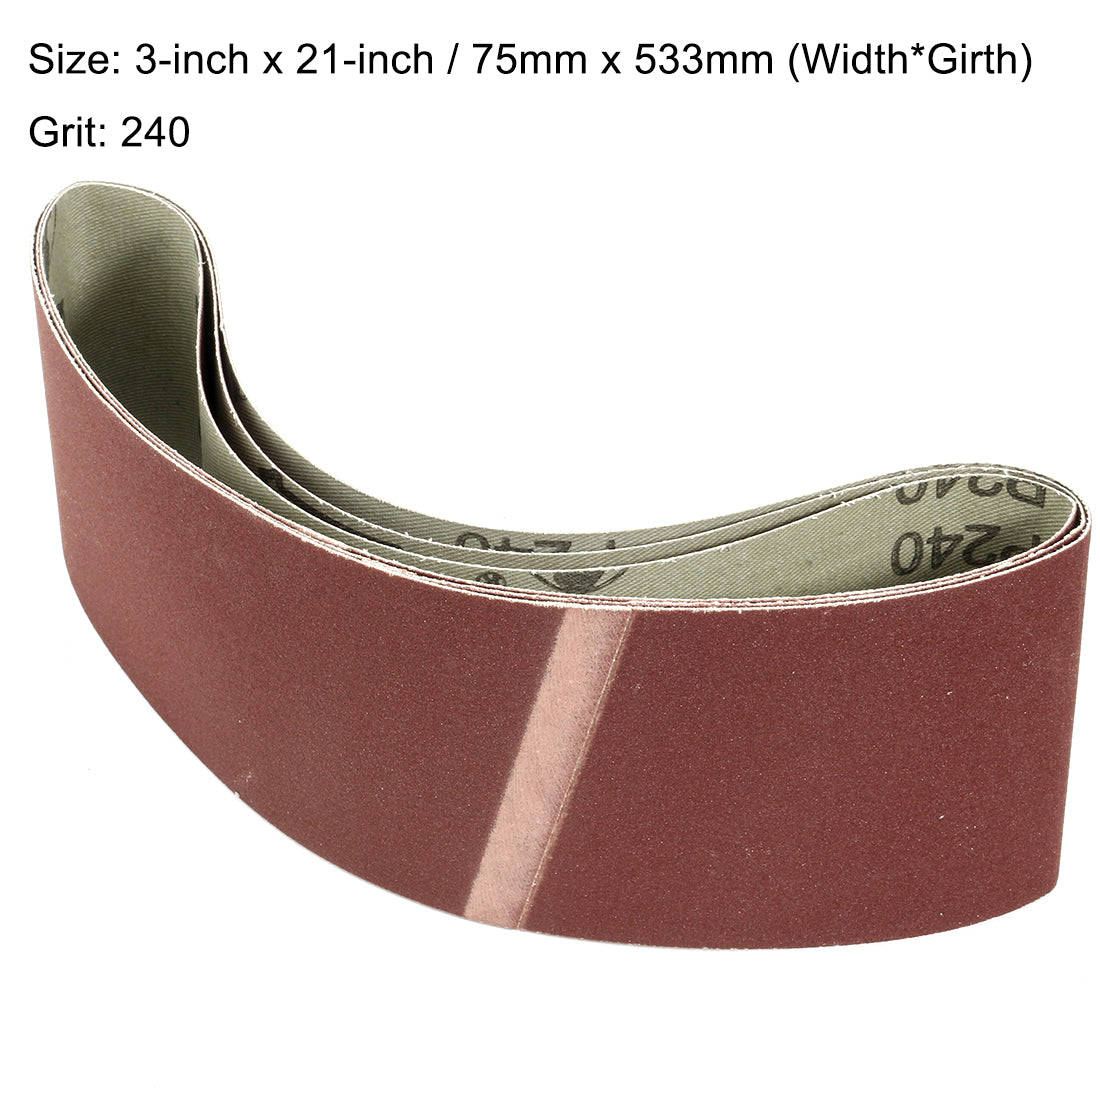 uxcell Uxcell 3-Inch x 21-Inch Aluminum Oxide Sanding Belt 240 Grits Lapped Joint 3pcs